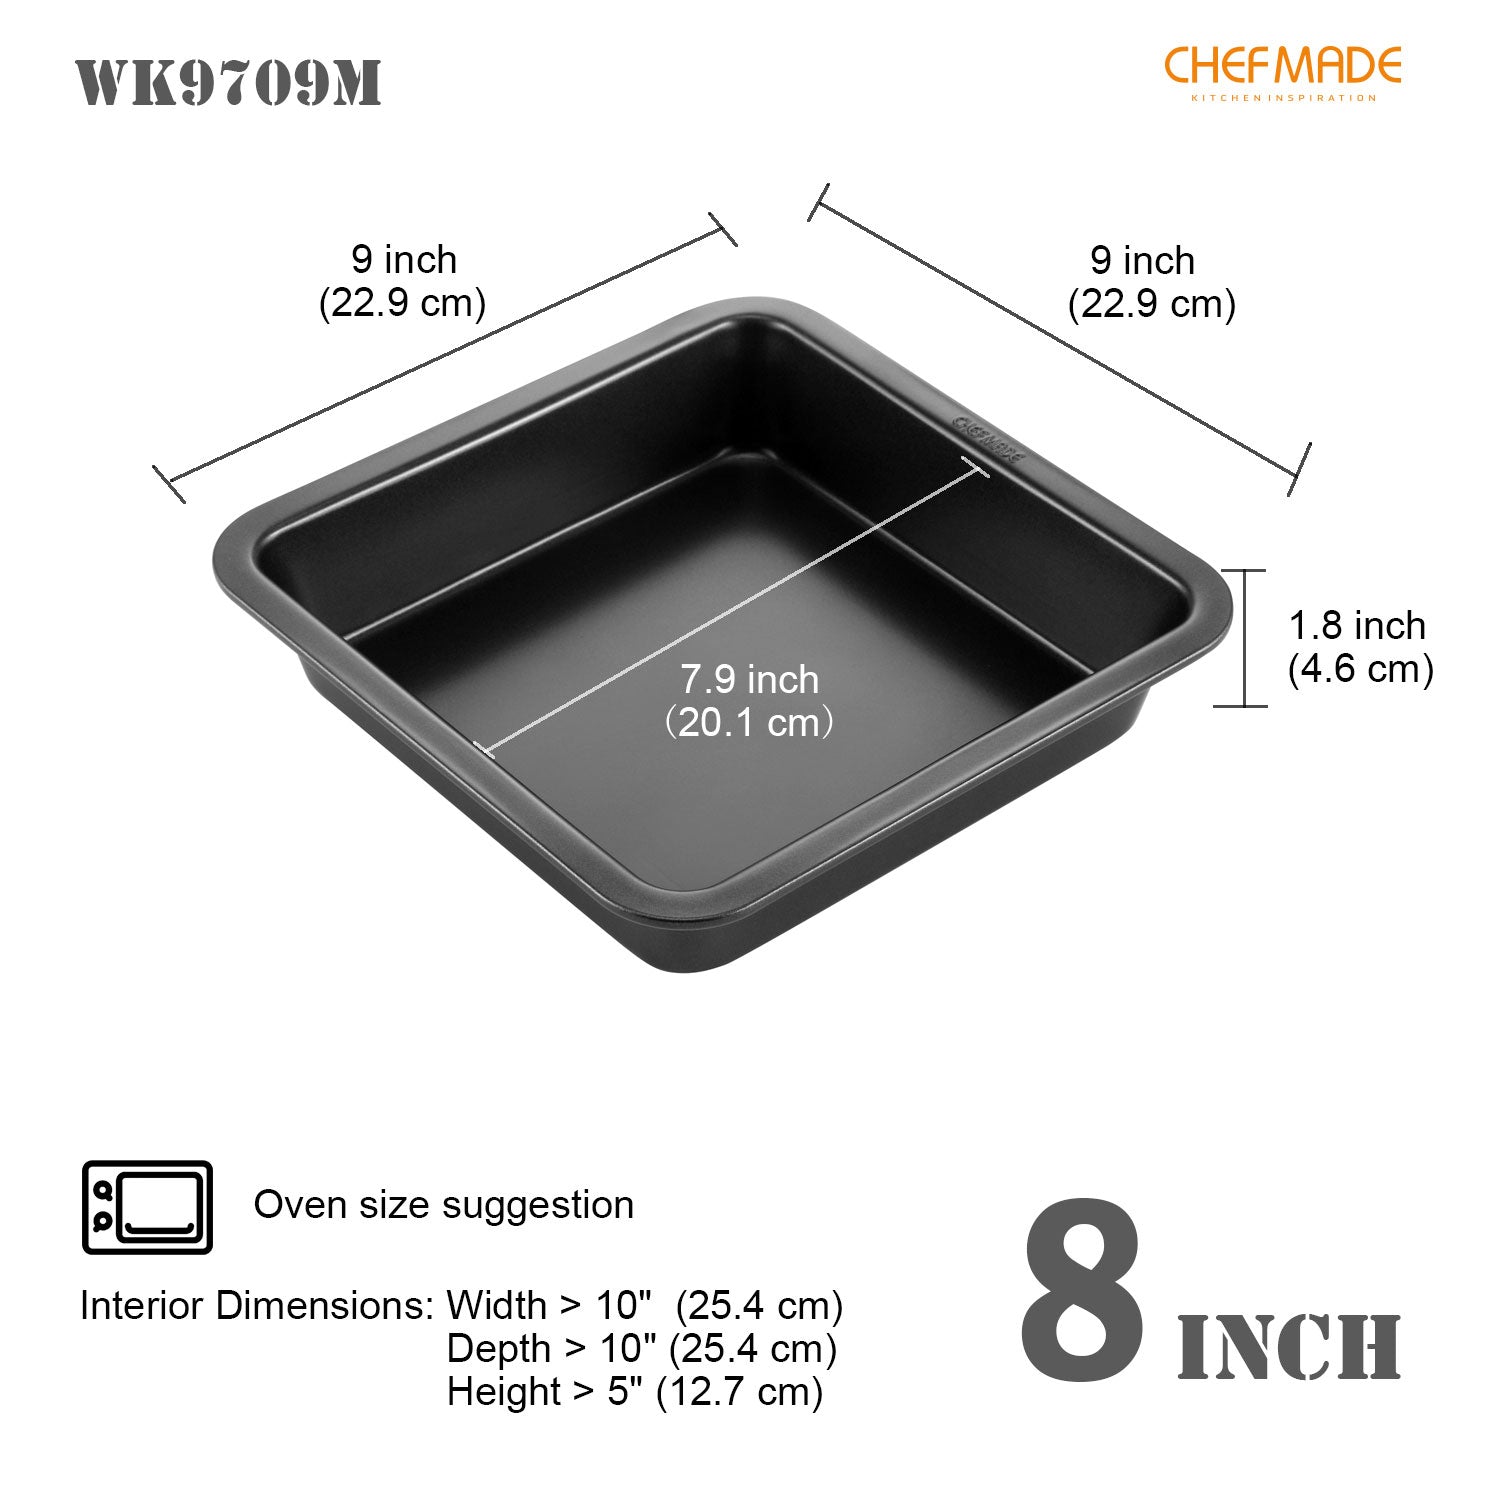 CHEFMADE Square Cake Pan, 8-Inch Bakeware Non-Stick Carbon Steel Pan Deep  Dish Oven Baking Mold Baking Tray Ovenware for Cakes, Bread, Pizza, Cookies